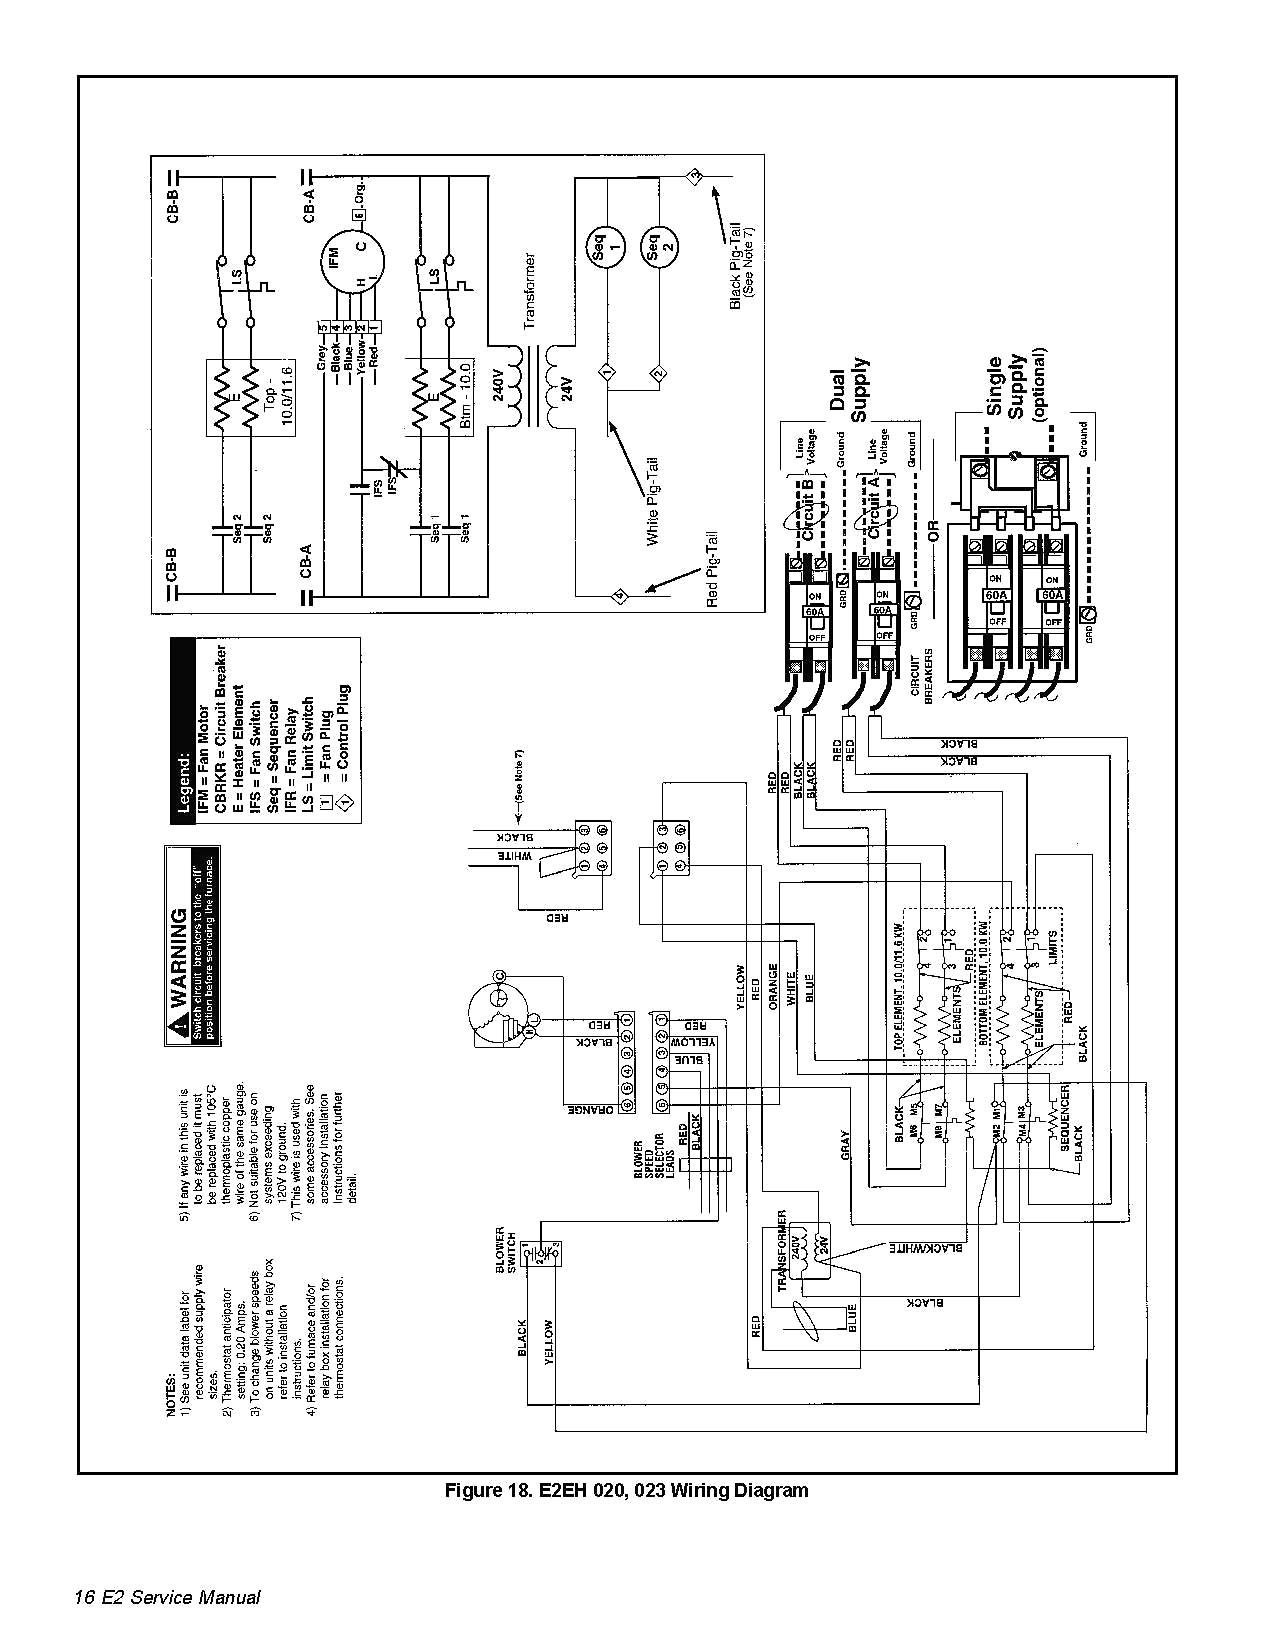 Wiring Diagram A Mobile Home Valid Electric Furnace Wire Diagram Intertherm Mobile Home Schematic